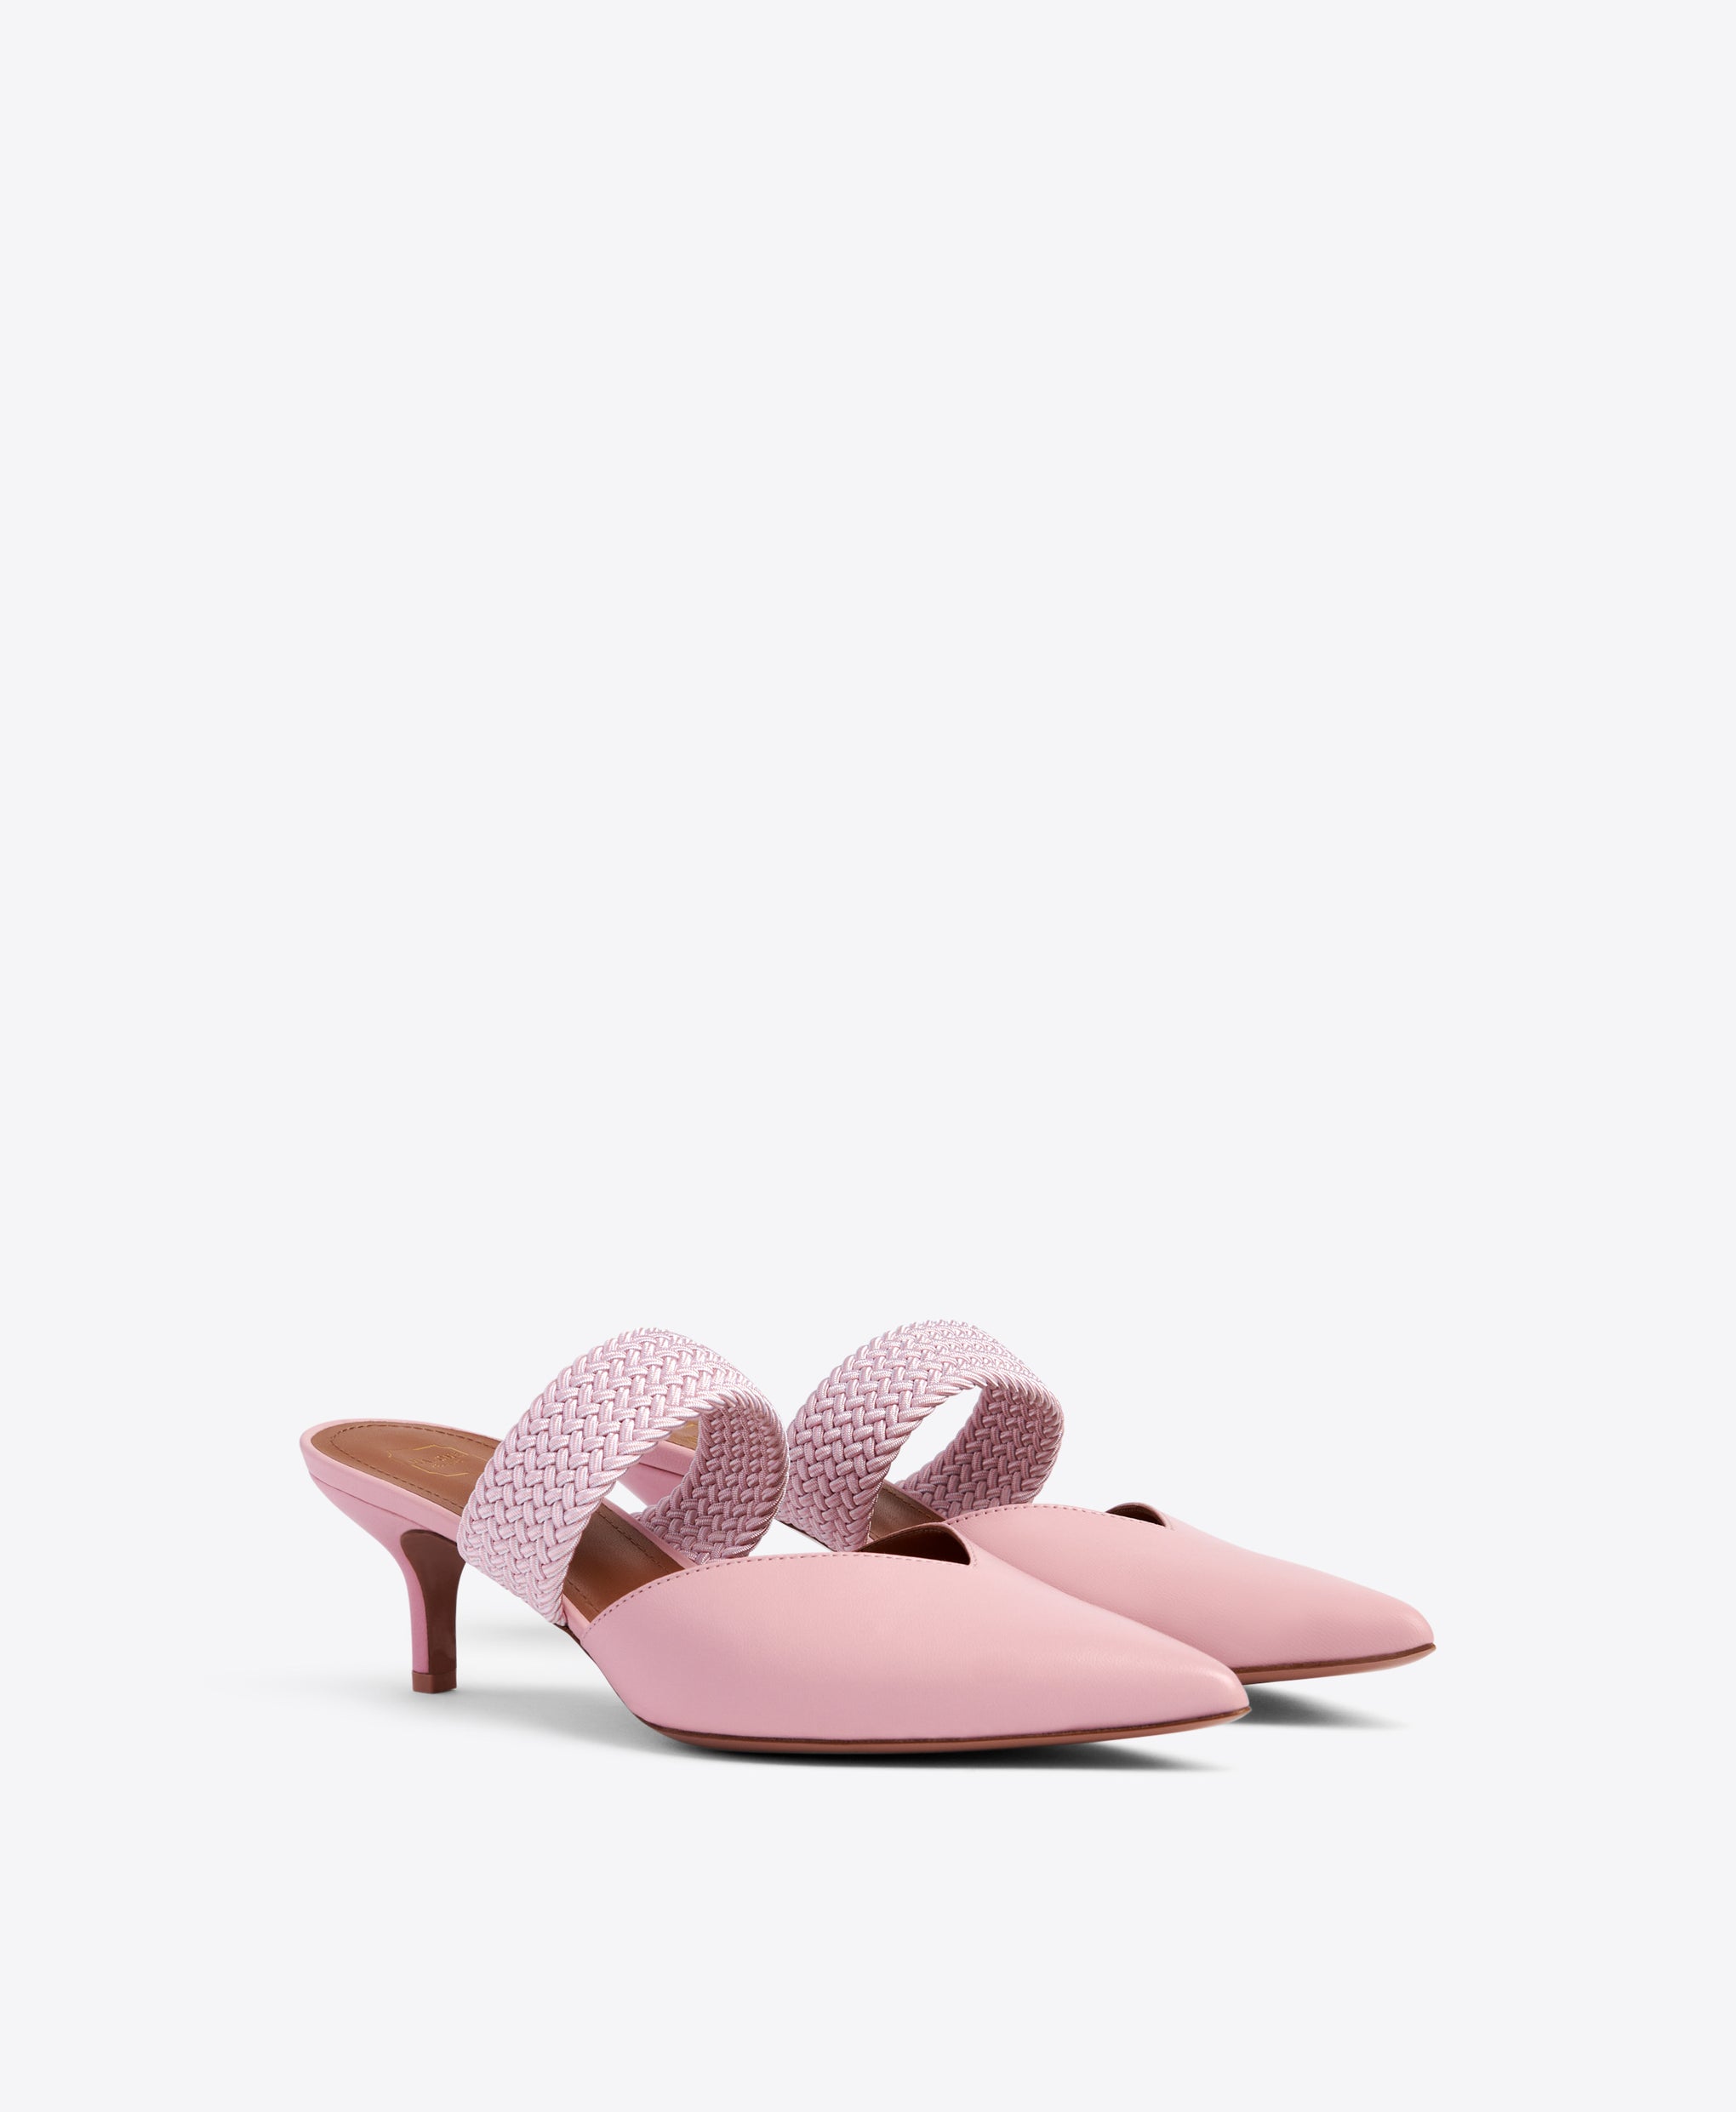 Malone Souliers Maisie 45mm Light Pink Leather Kitten Heel Mules